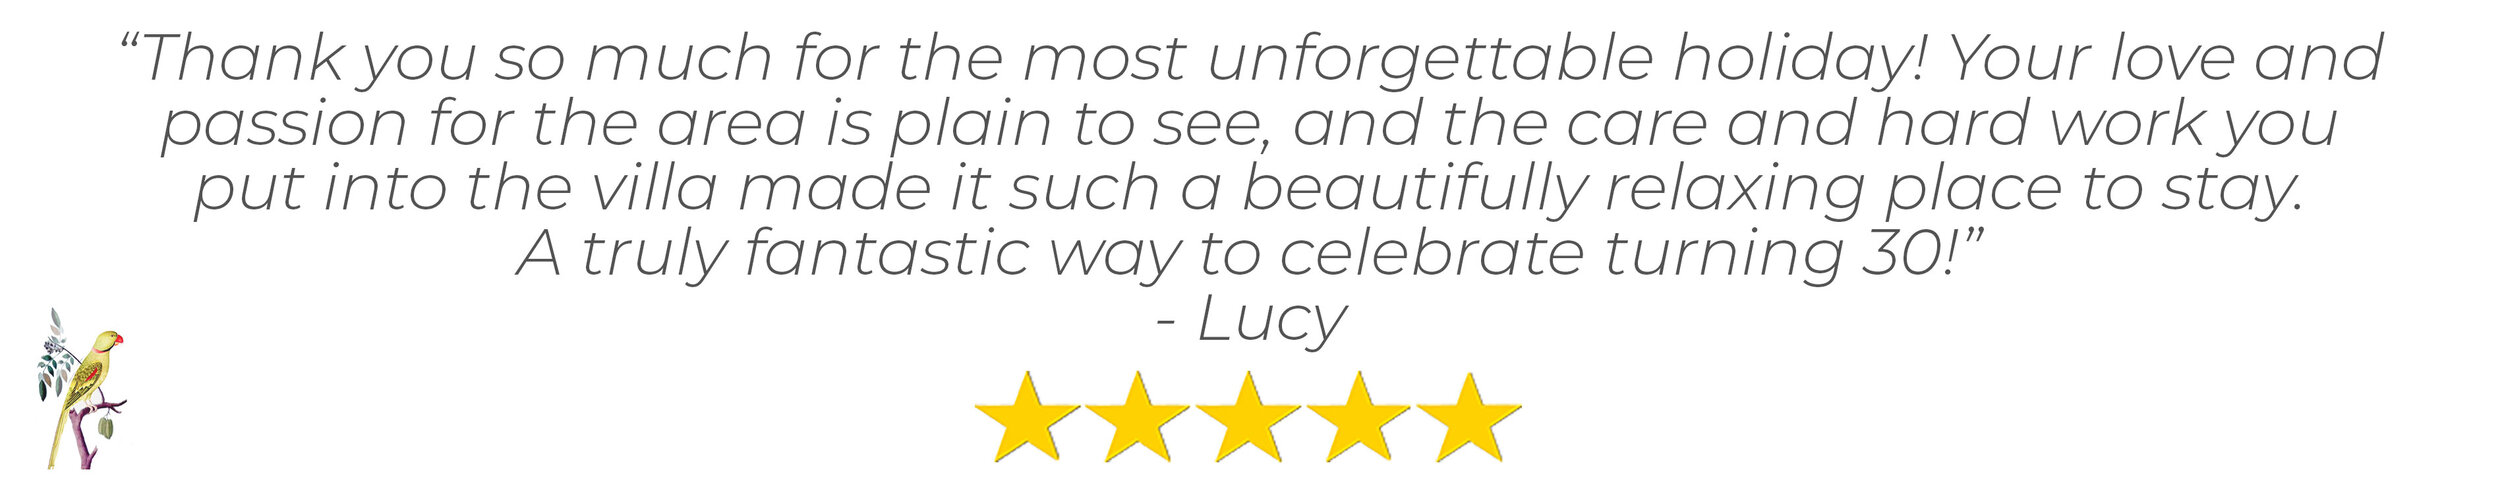 A five star review from Lua Cheia guest Lucie